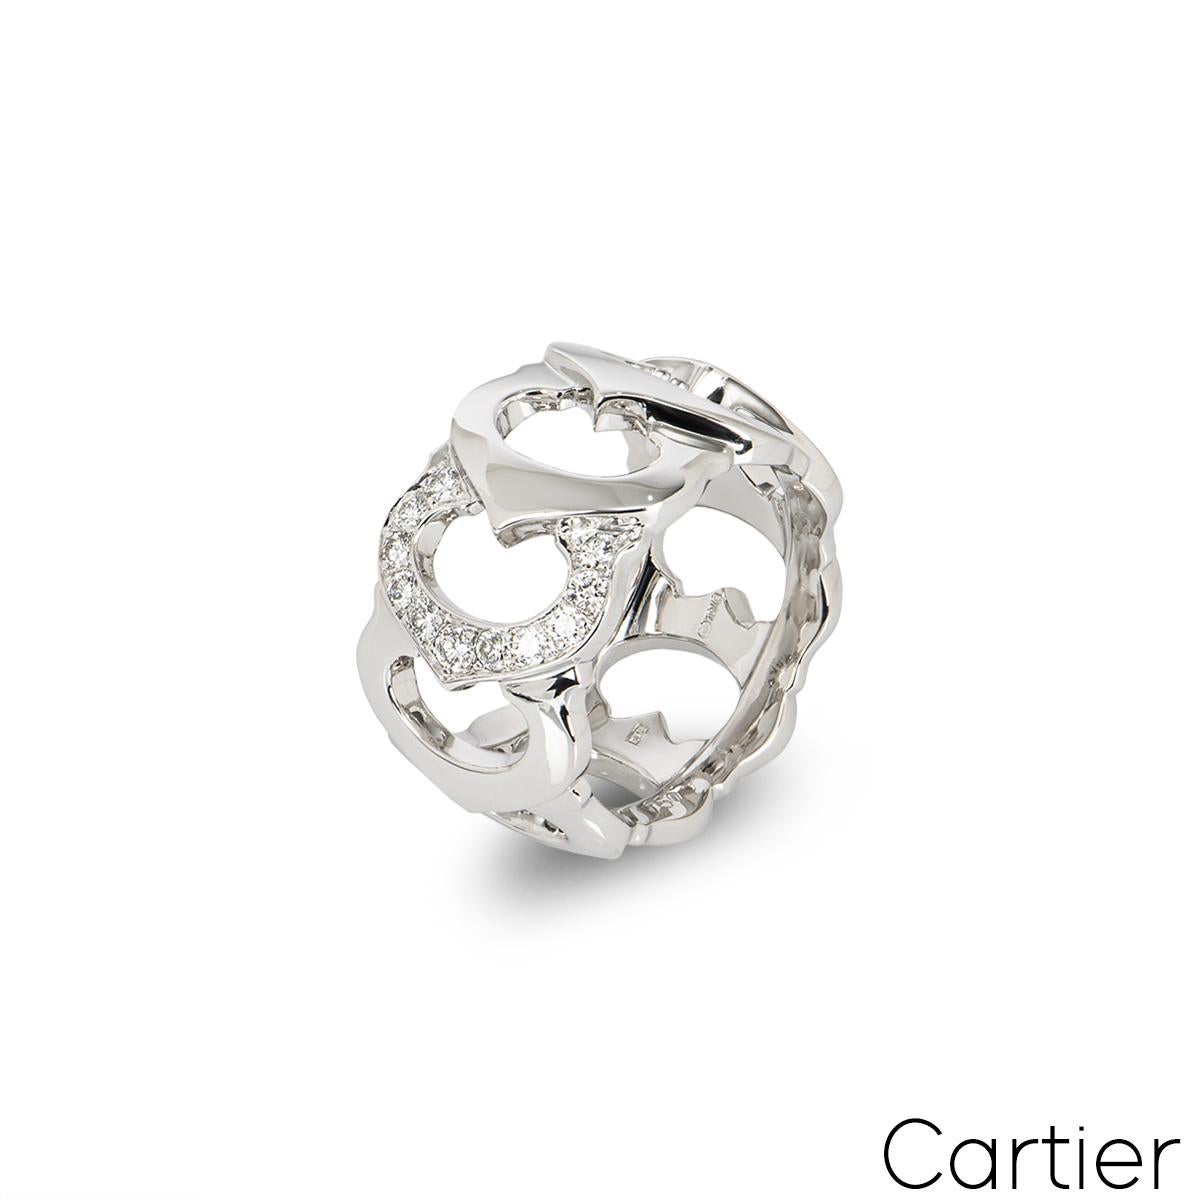 A beautiful vintage 18k white gold ring by Cartier from the C de Cartier collection. The openwork ring features 9 interlocking iconic C motifs, one pave set with 11 round brilliant cut diamonds totalling approximately 0.25ct. The ring measures